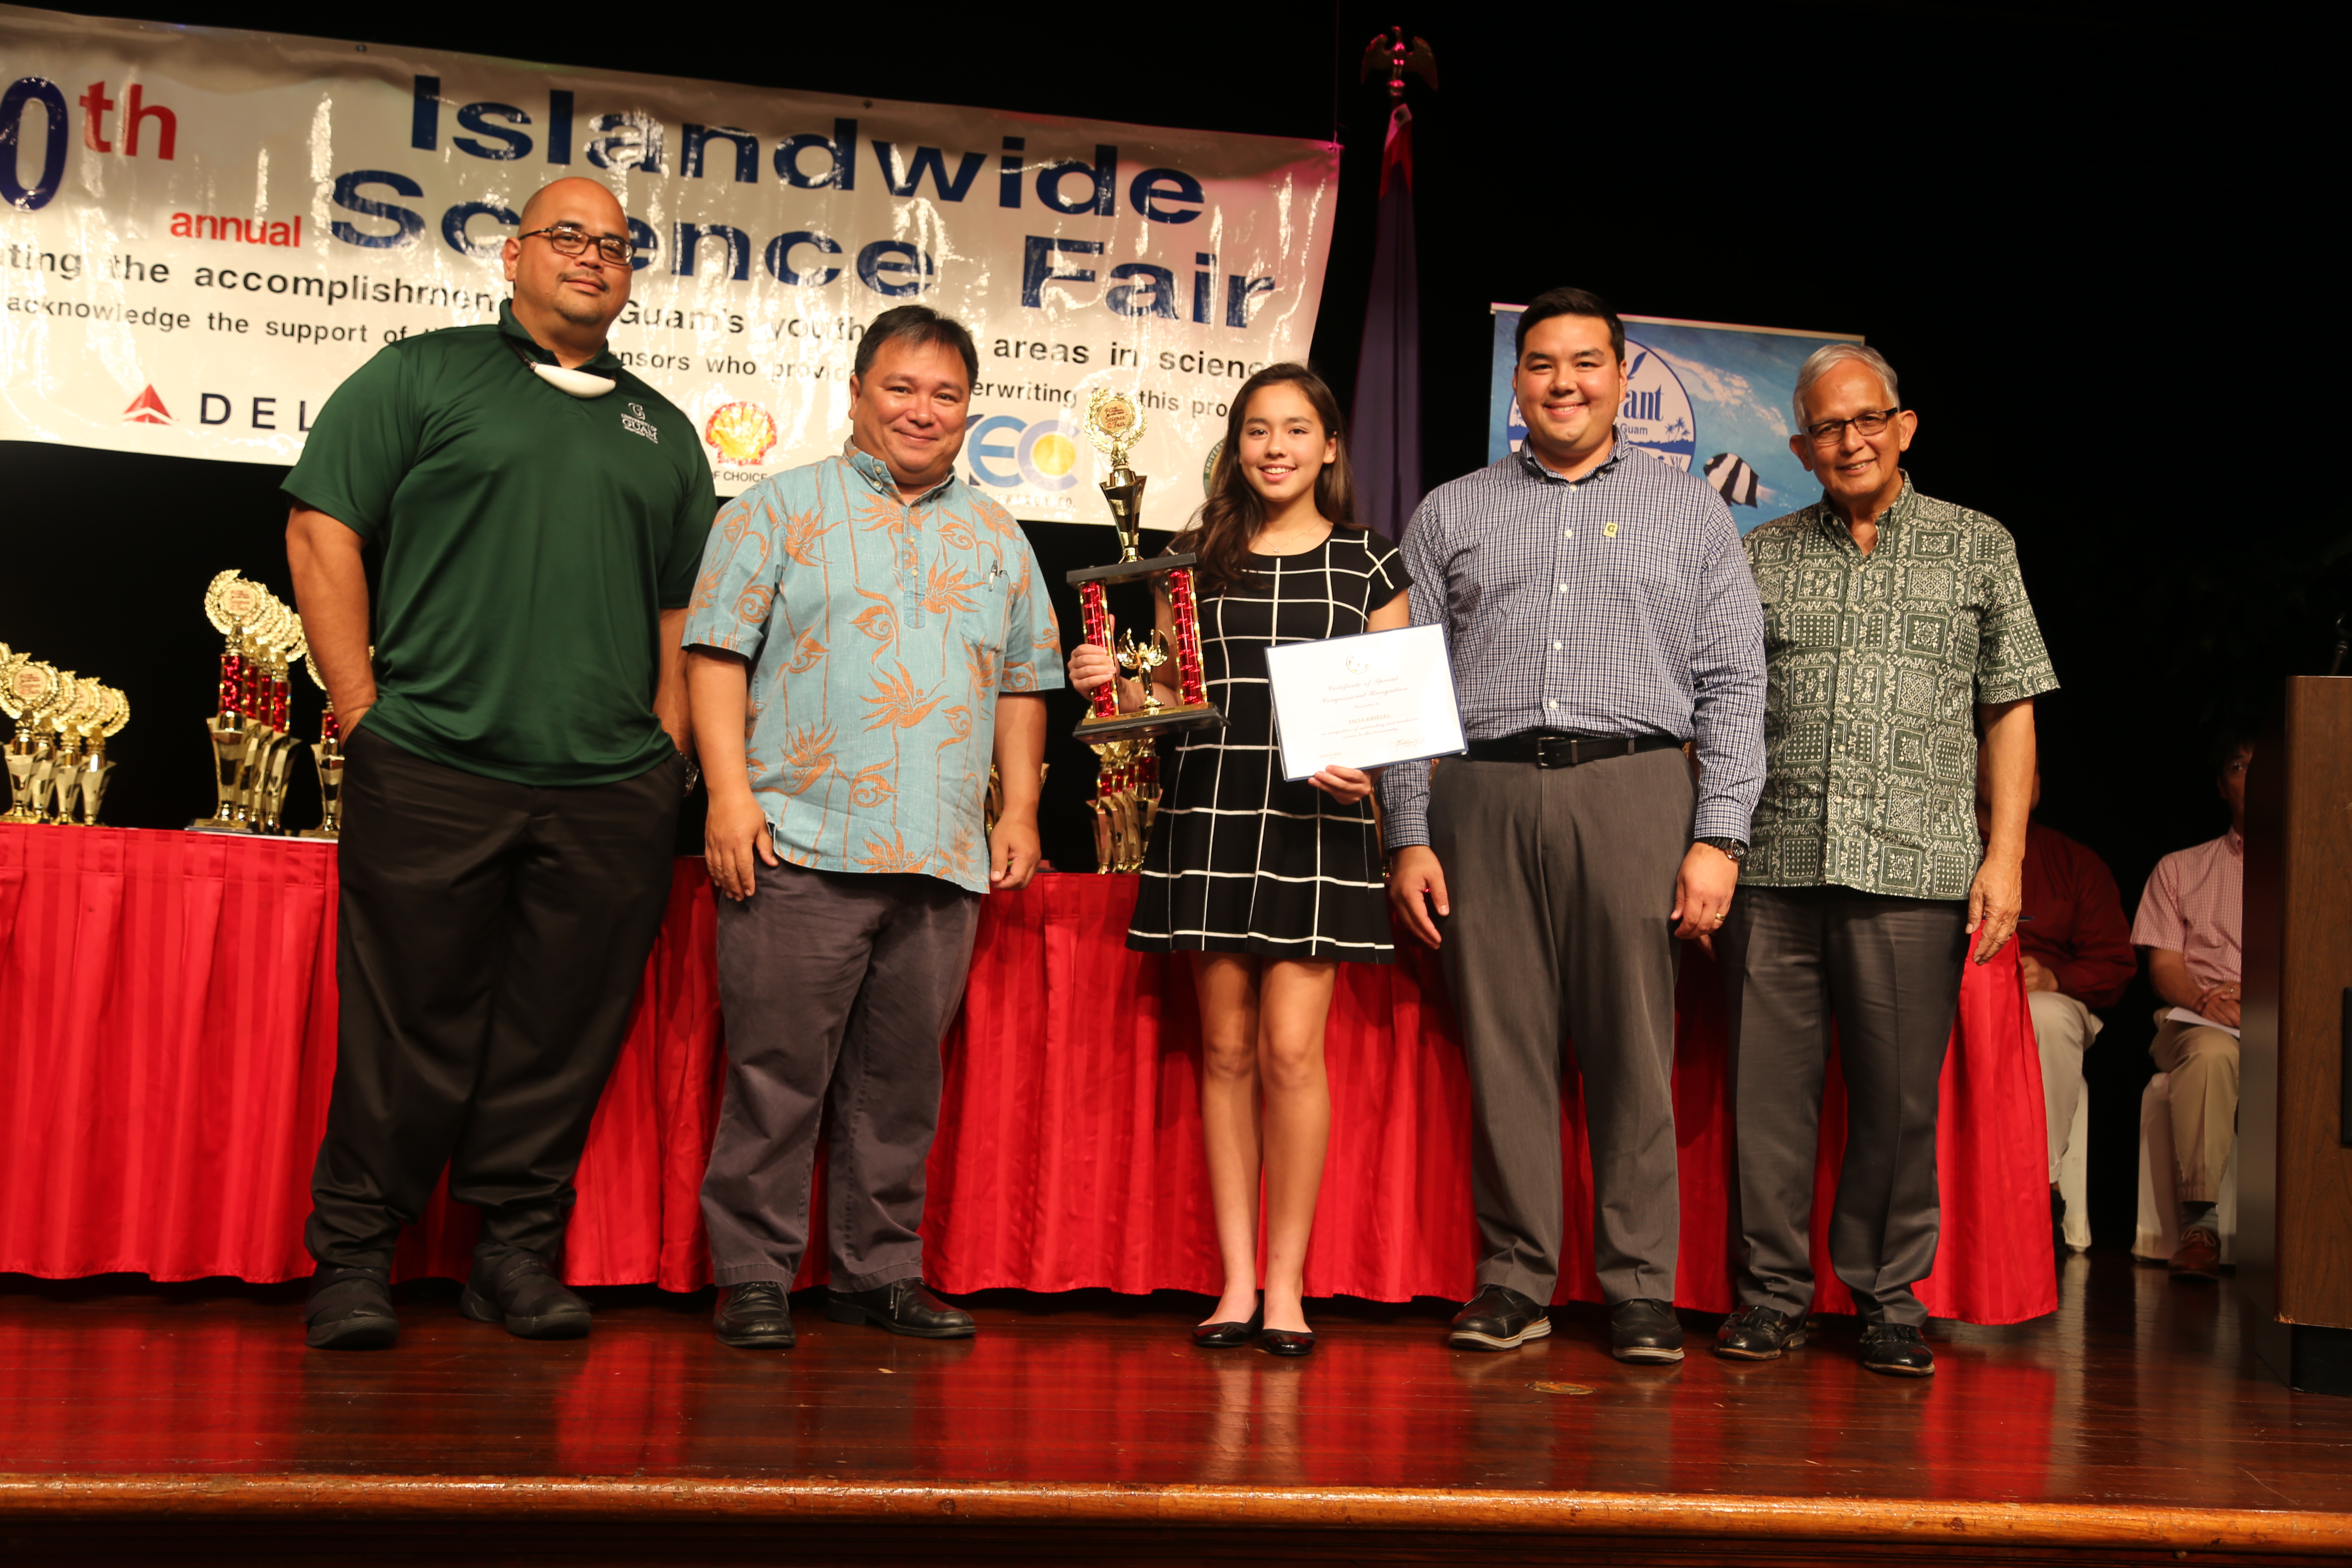 Talia Kriegal of St. John’s School (centered) receives the award for first place in Division 3. (From left to right) UOG Reference and Instruction Librarian, Roland San Nicolas, UOG Associate Professor of Biology Dr. Frank Camacho, Talia Kriegal, UOG Assistant Professor of Extension & Outreach Dr. Austin Shelton, and UOG President Dr. Robert Underwood.